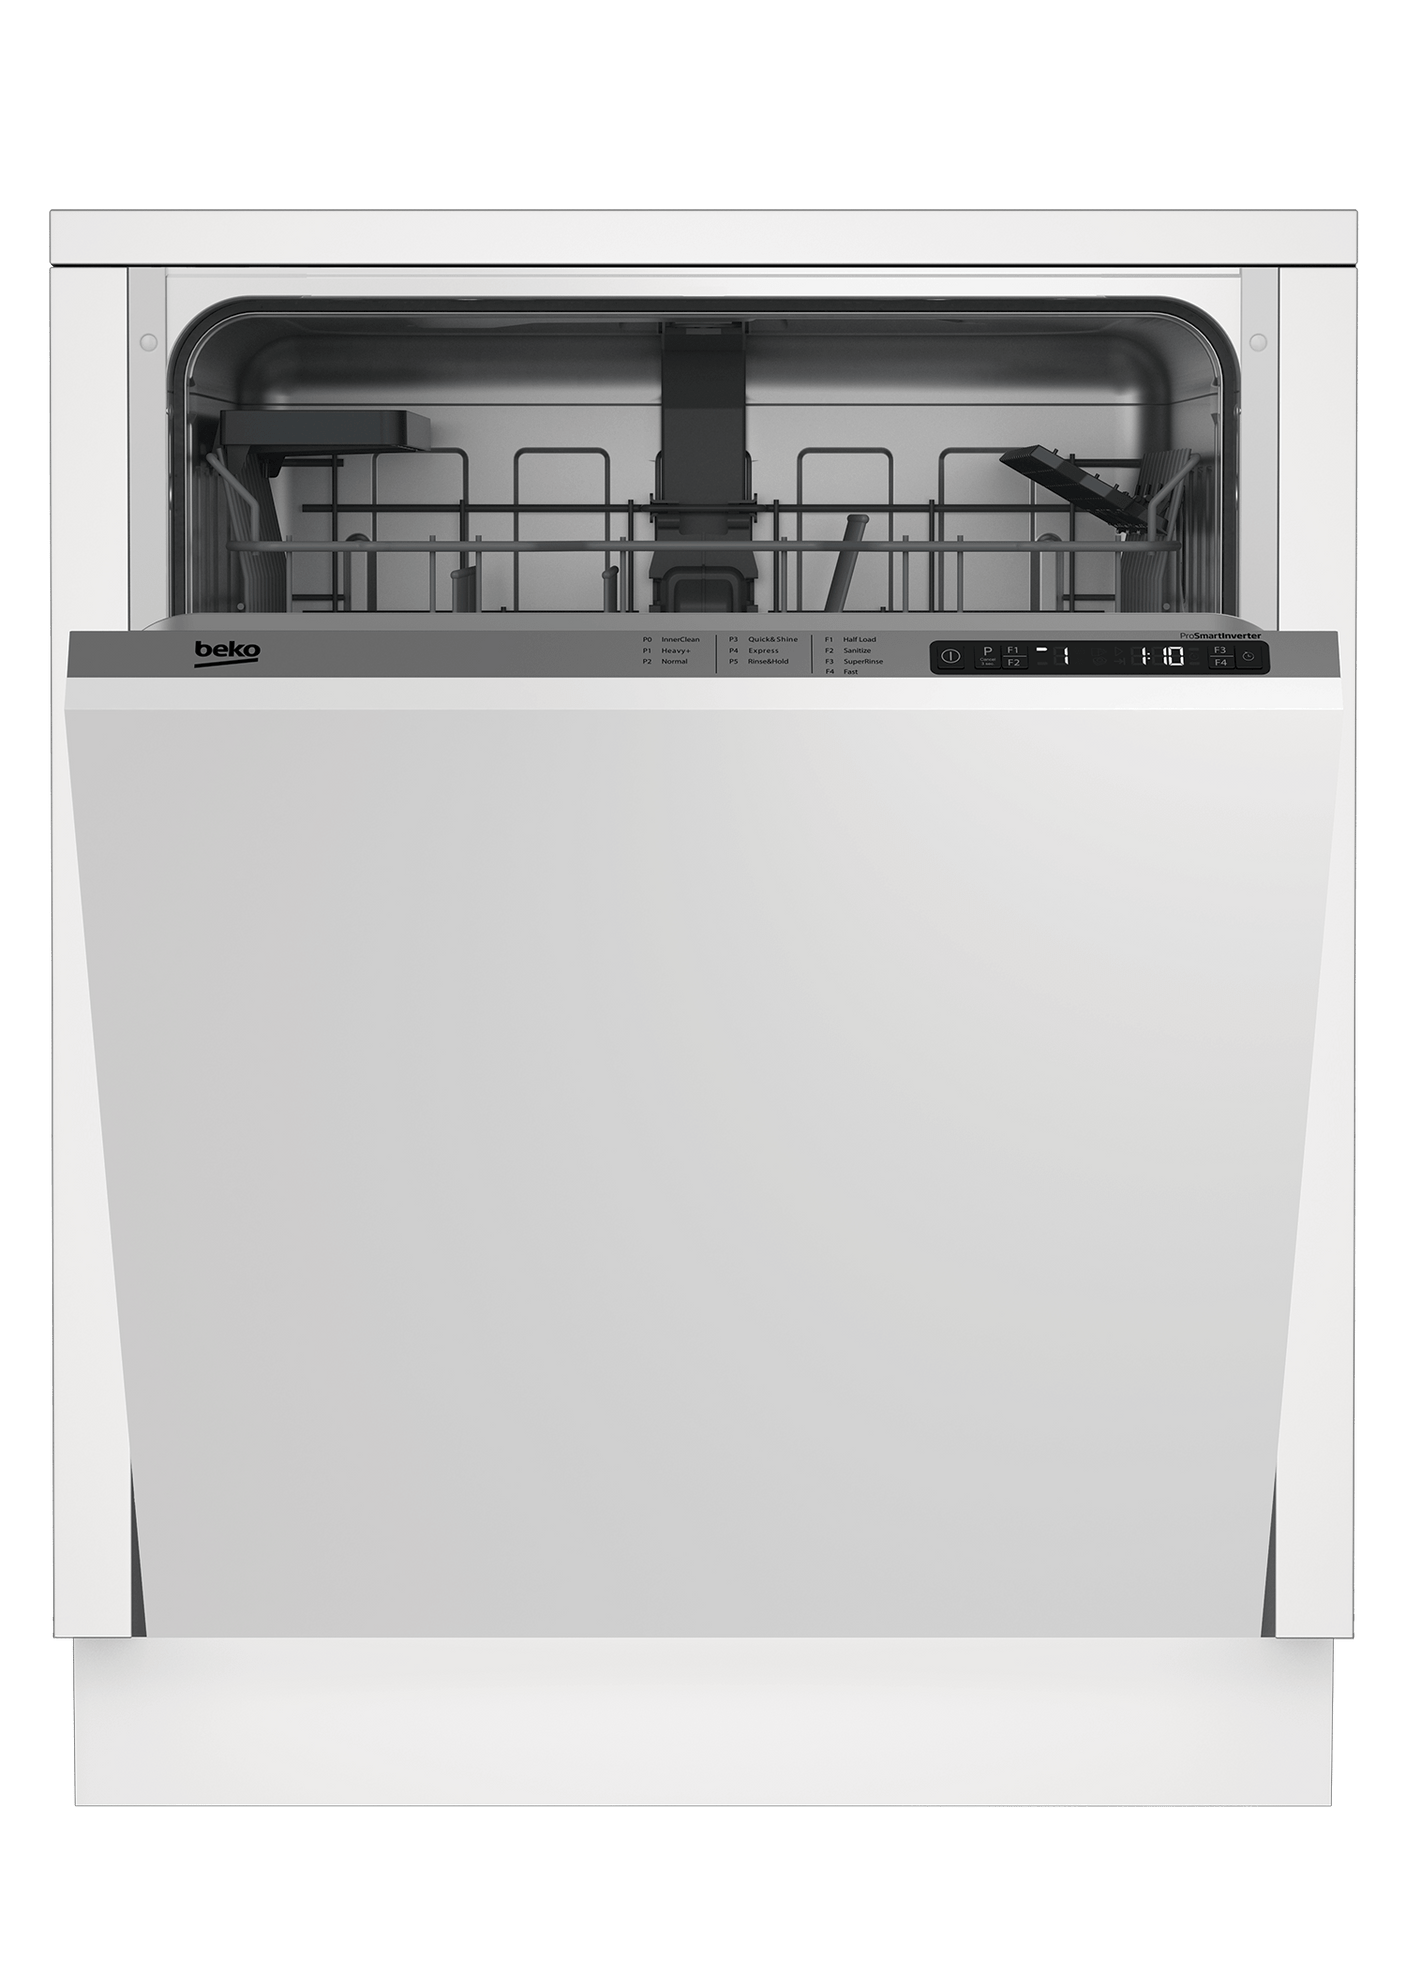 Full Size Dishwasher, 14 place settings, 48 dBa, Fully Integrated Panel Ready